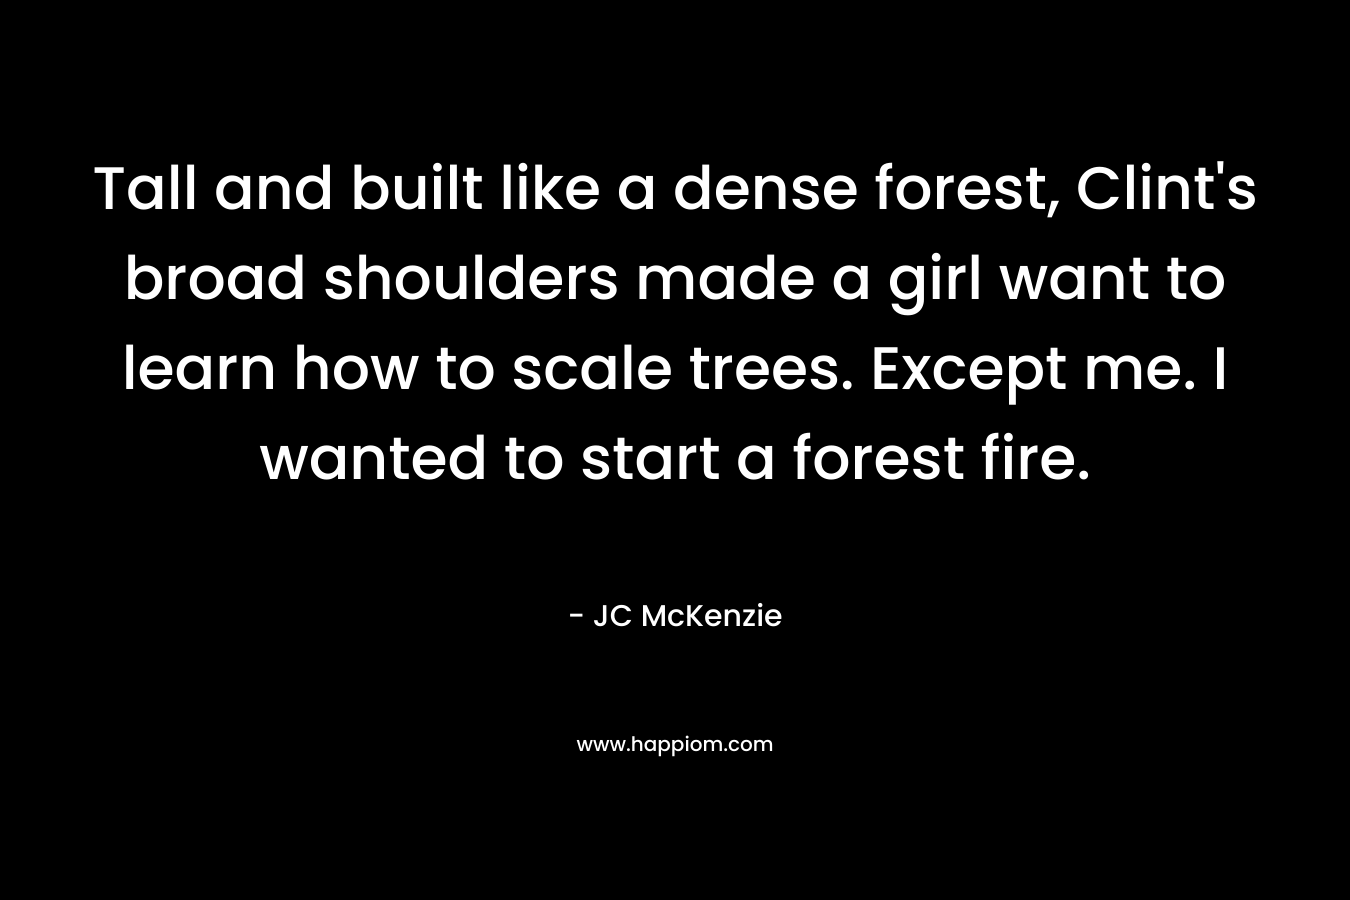 Tall and built like a dense forest, Clint’s broad shoulders made a girl want to learn how to scale trees. Except me. I wanted to start a forest fire. – JC McKenzie